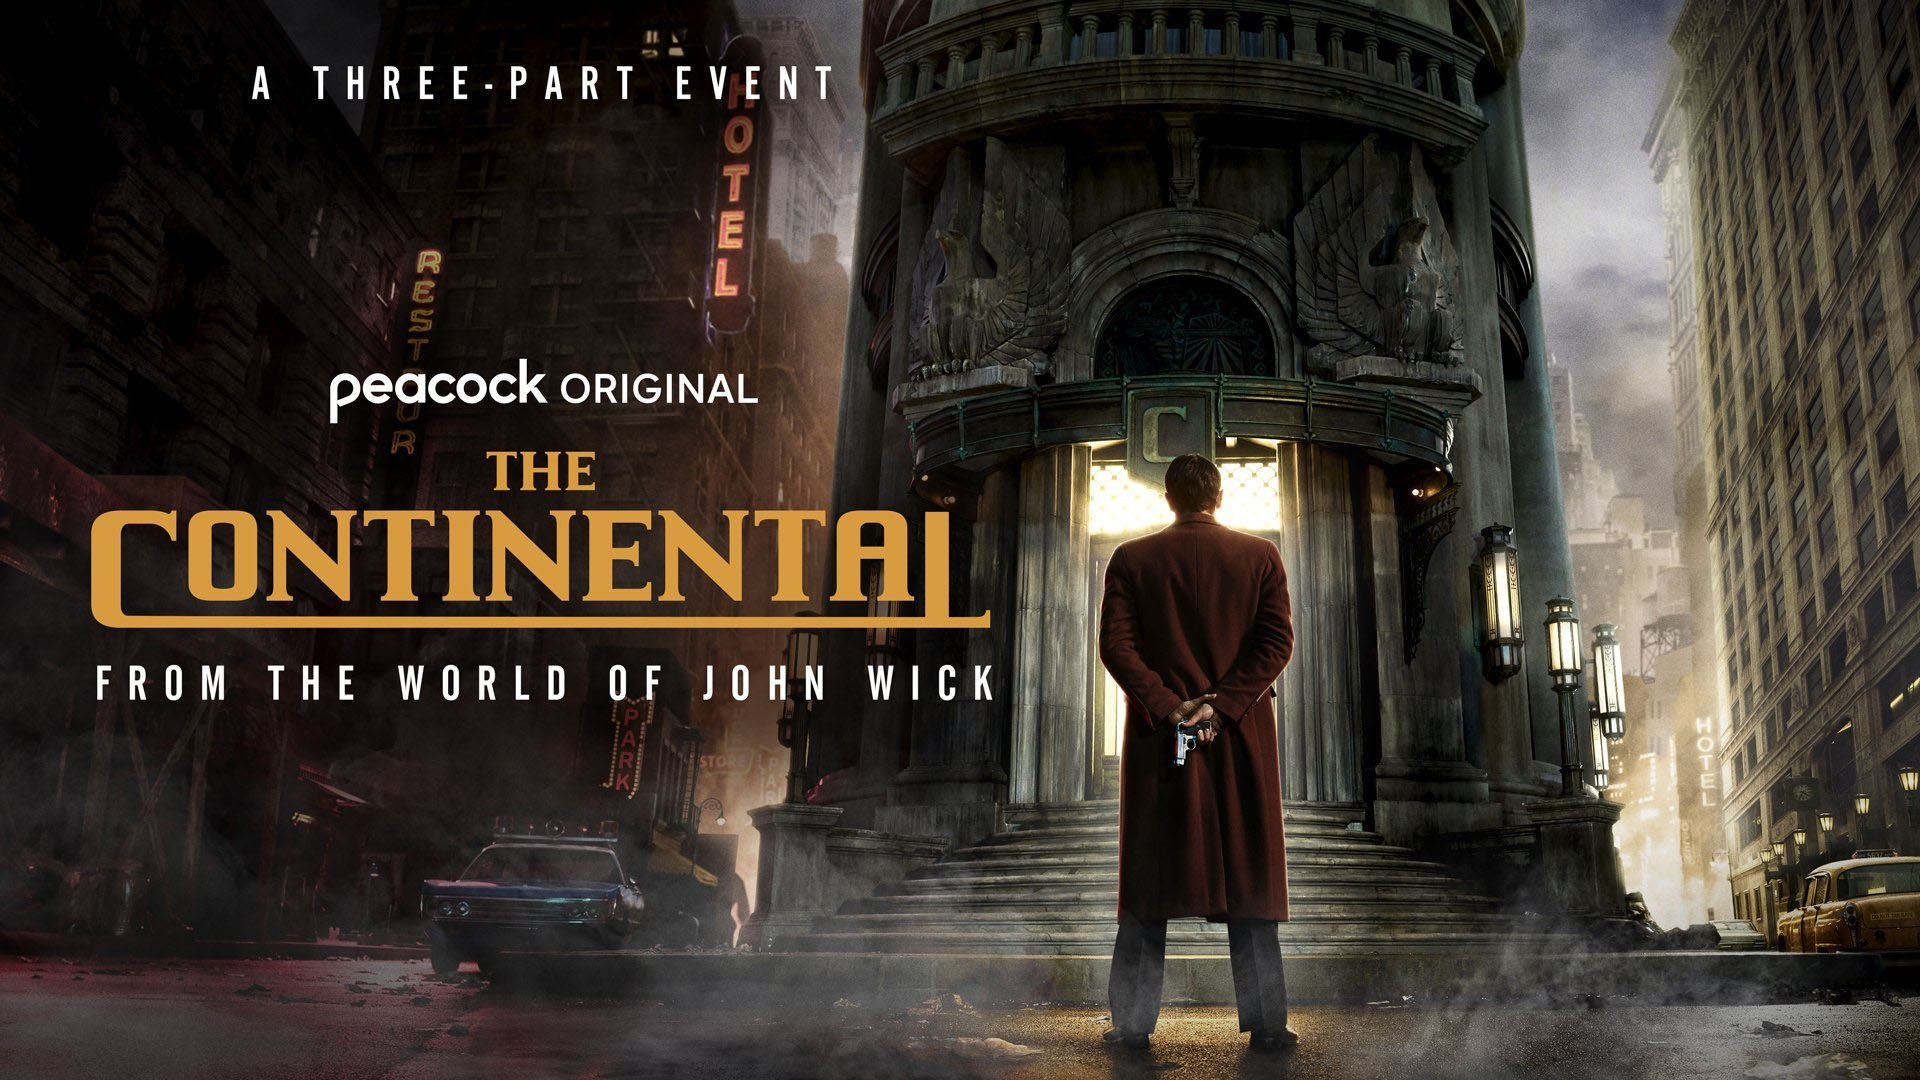 John Wick spinoff The Continental